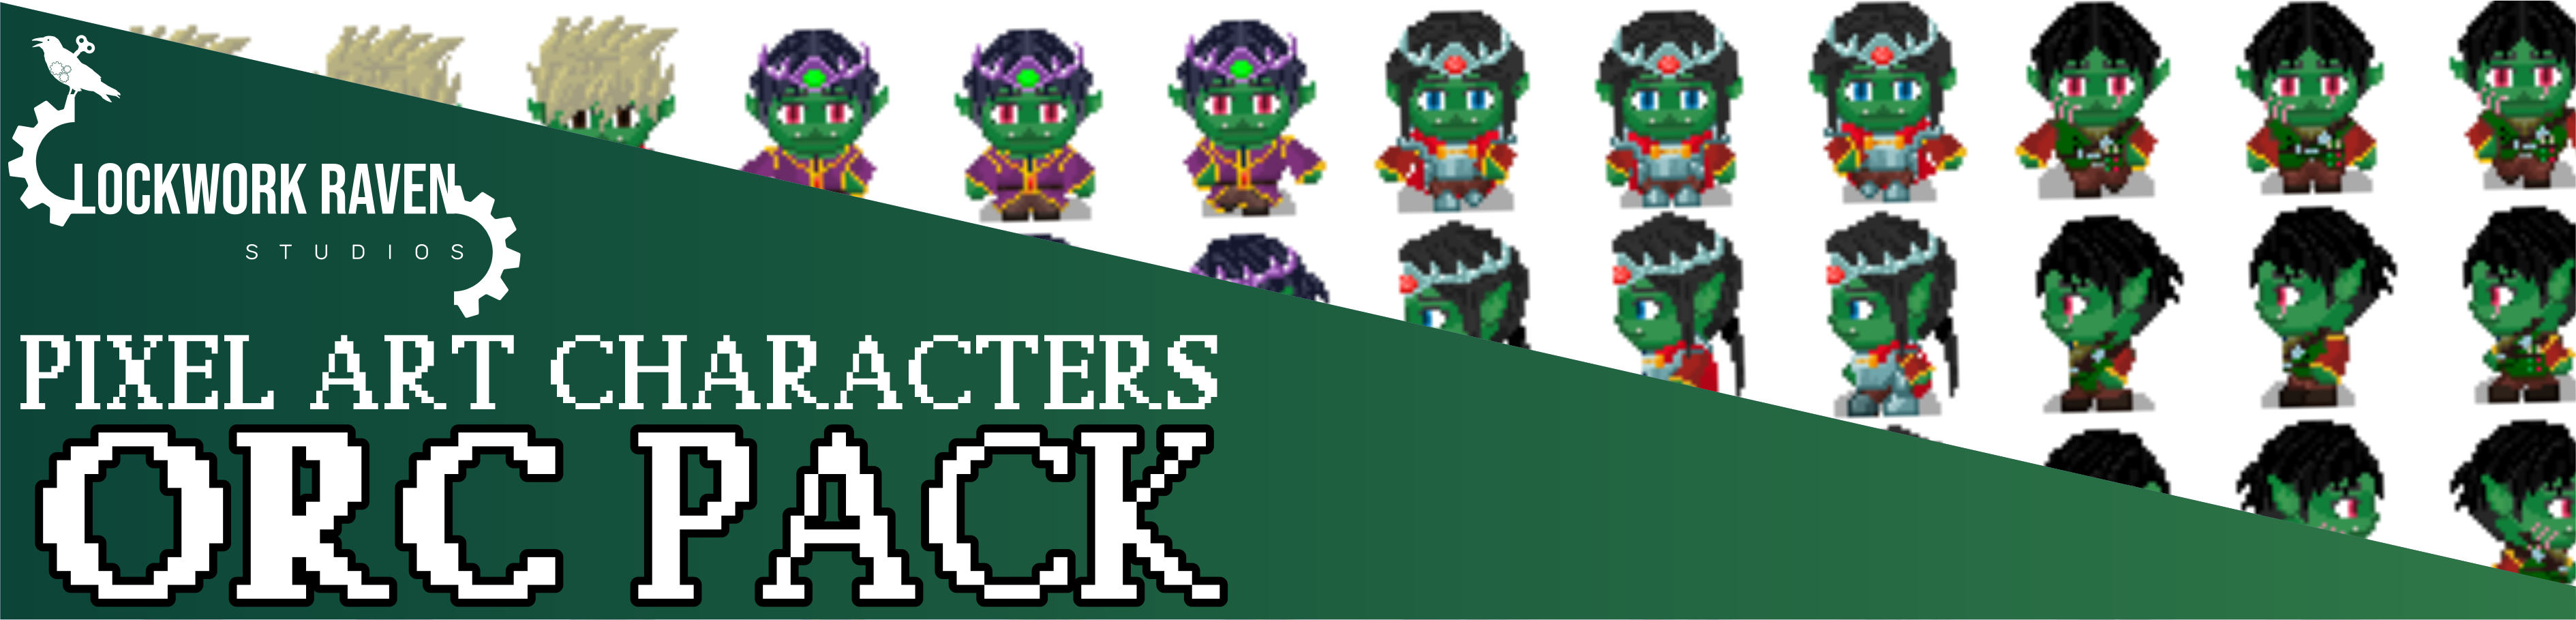 Pixel Art Characters - Orc Pack